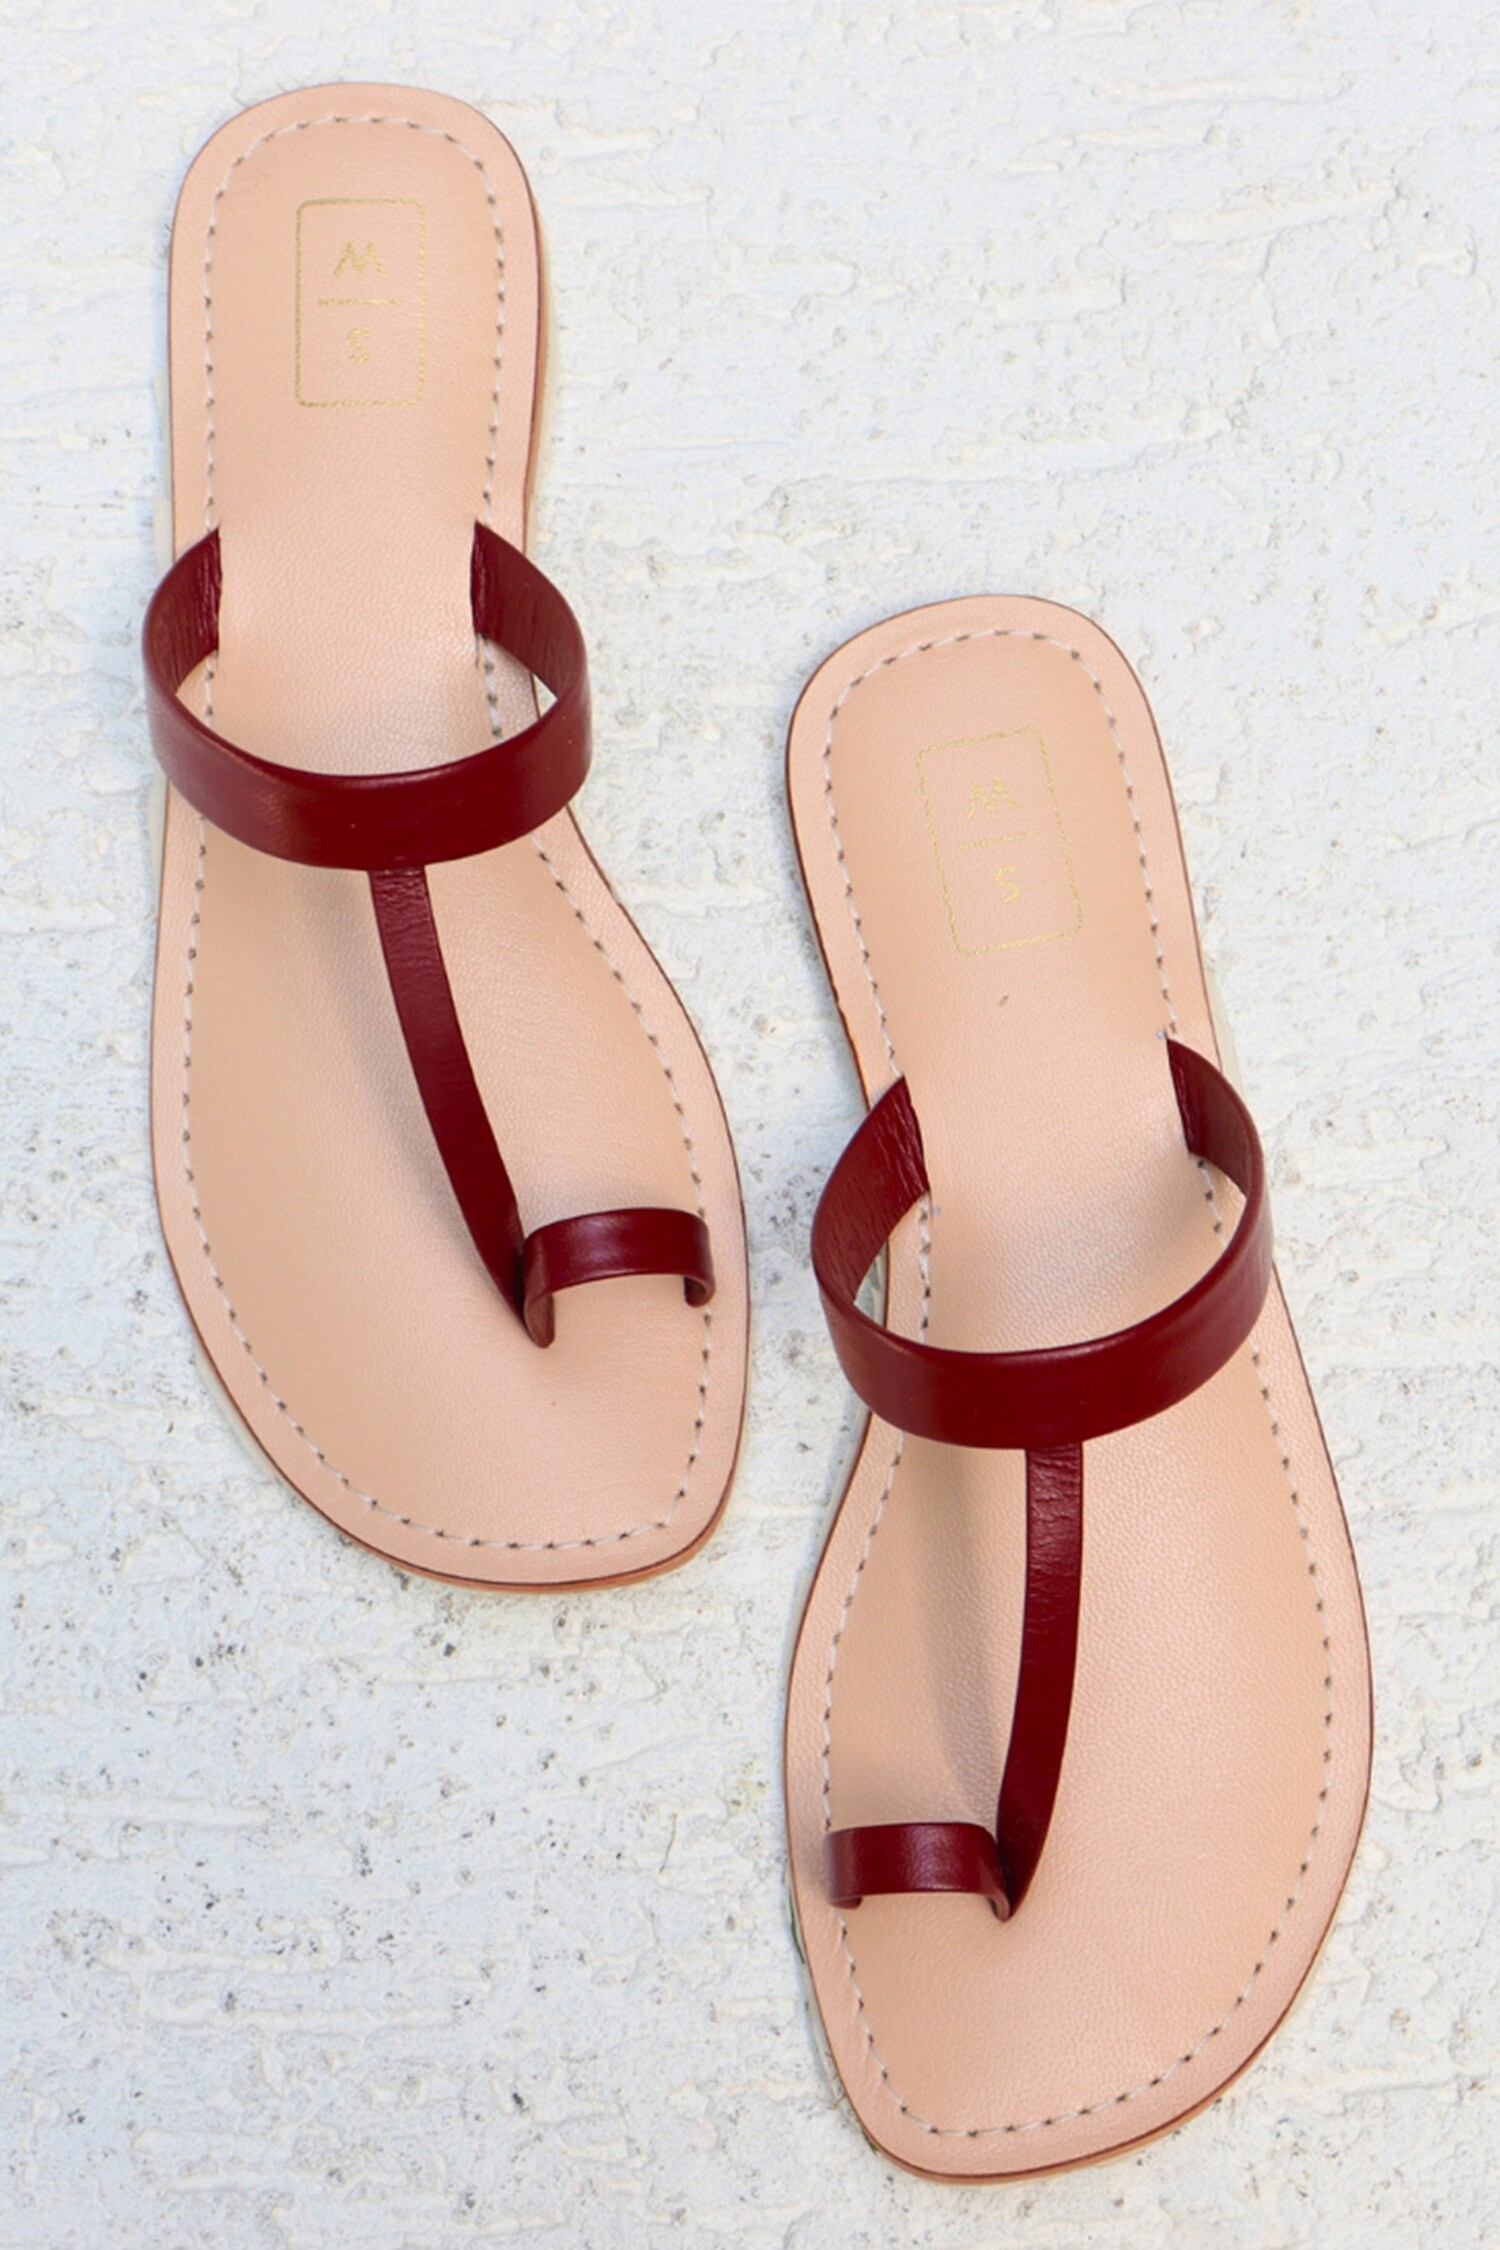 Sandalwali Maroon Leather Monica Solid Toe Ring Sandals